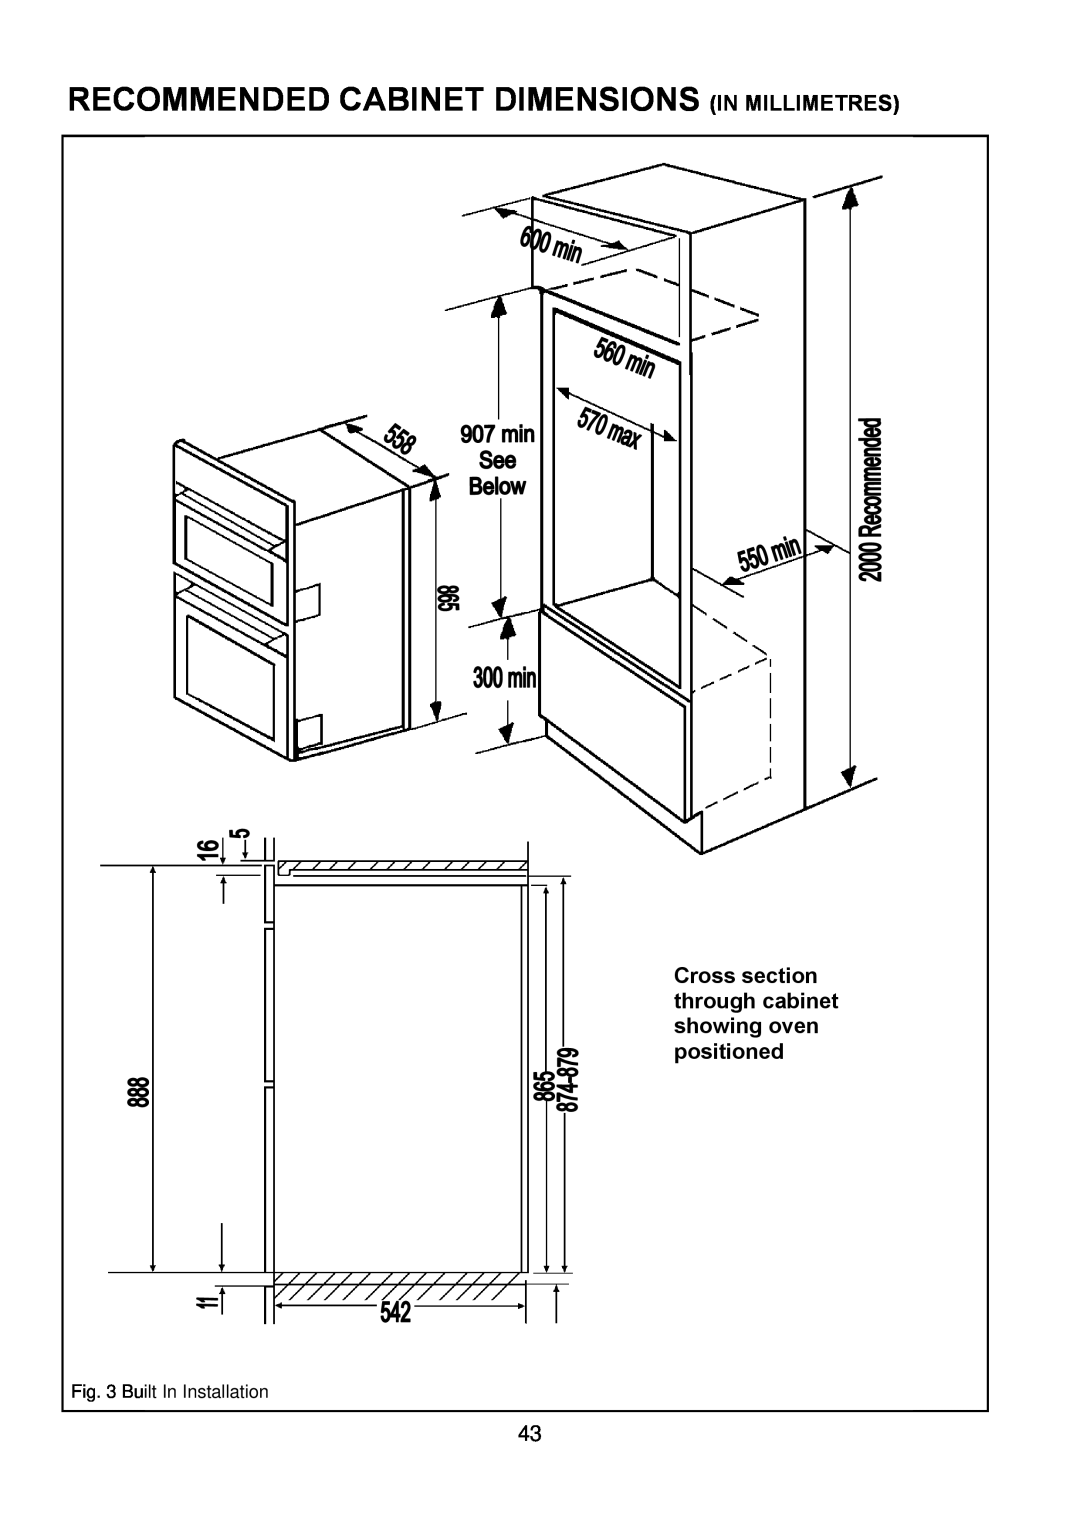 Zanussi ZOD 685 manual Recommended Cabinet Dimensions In Millimetres, Cross section through cabinet showing oven positioned 